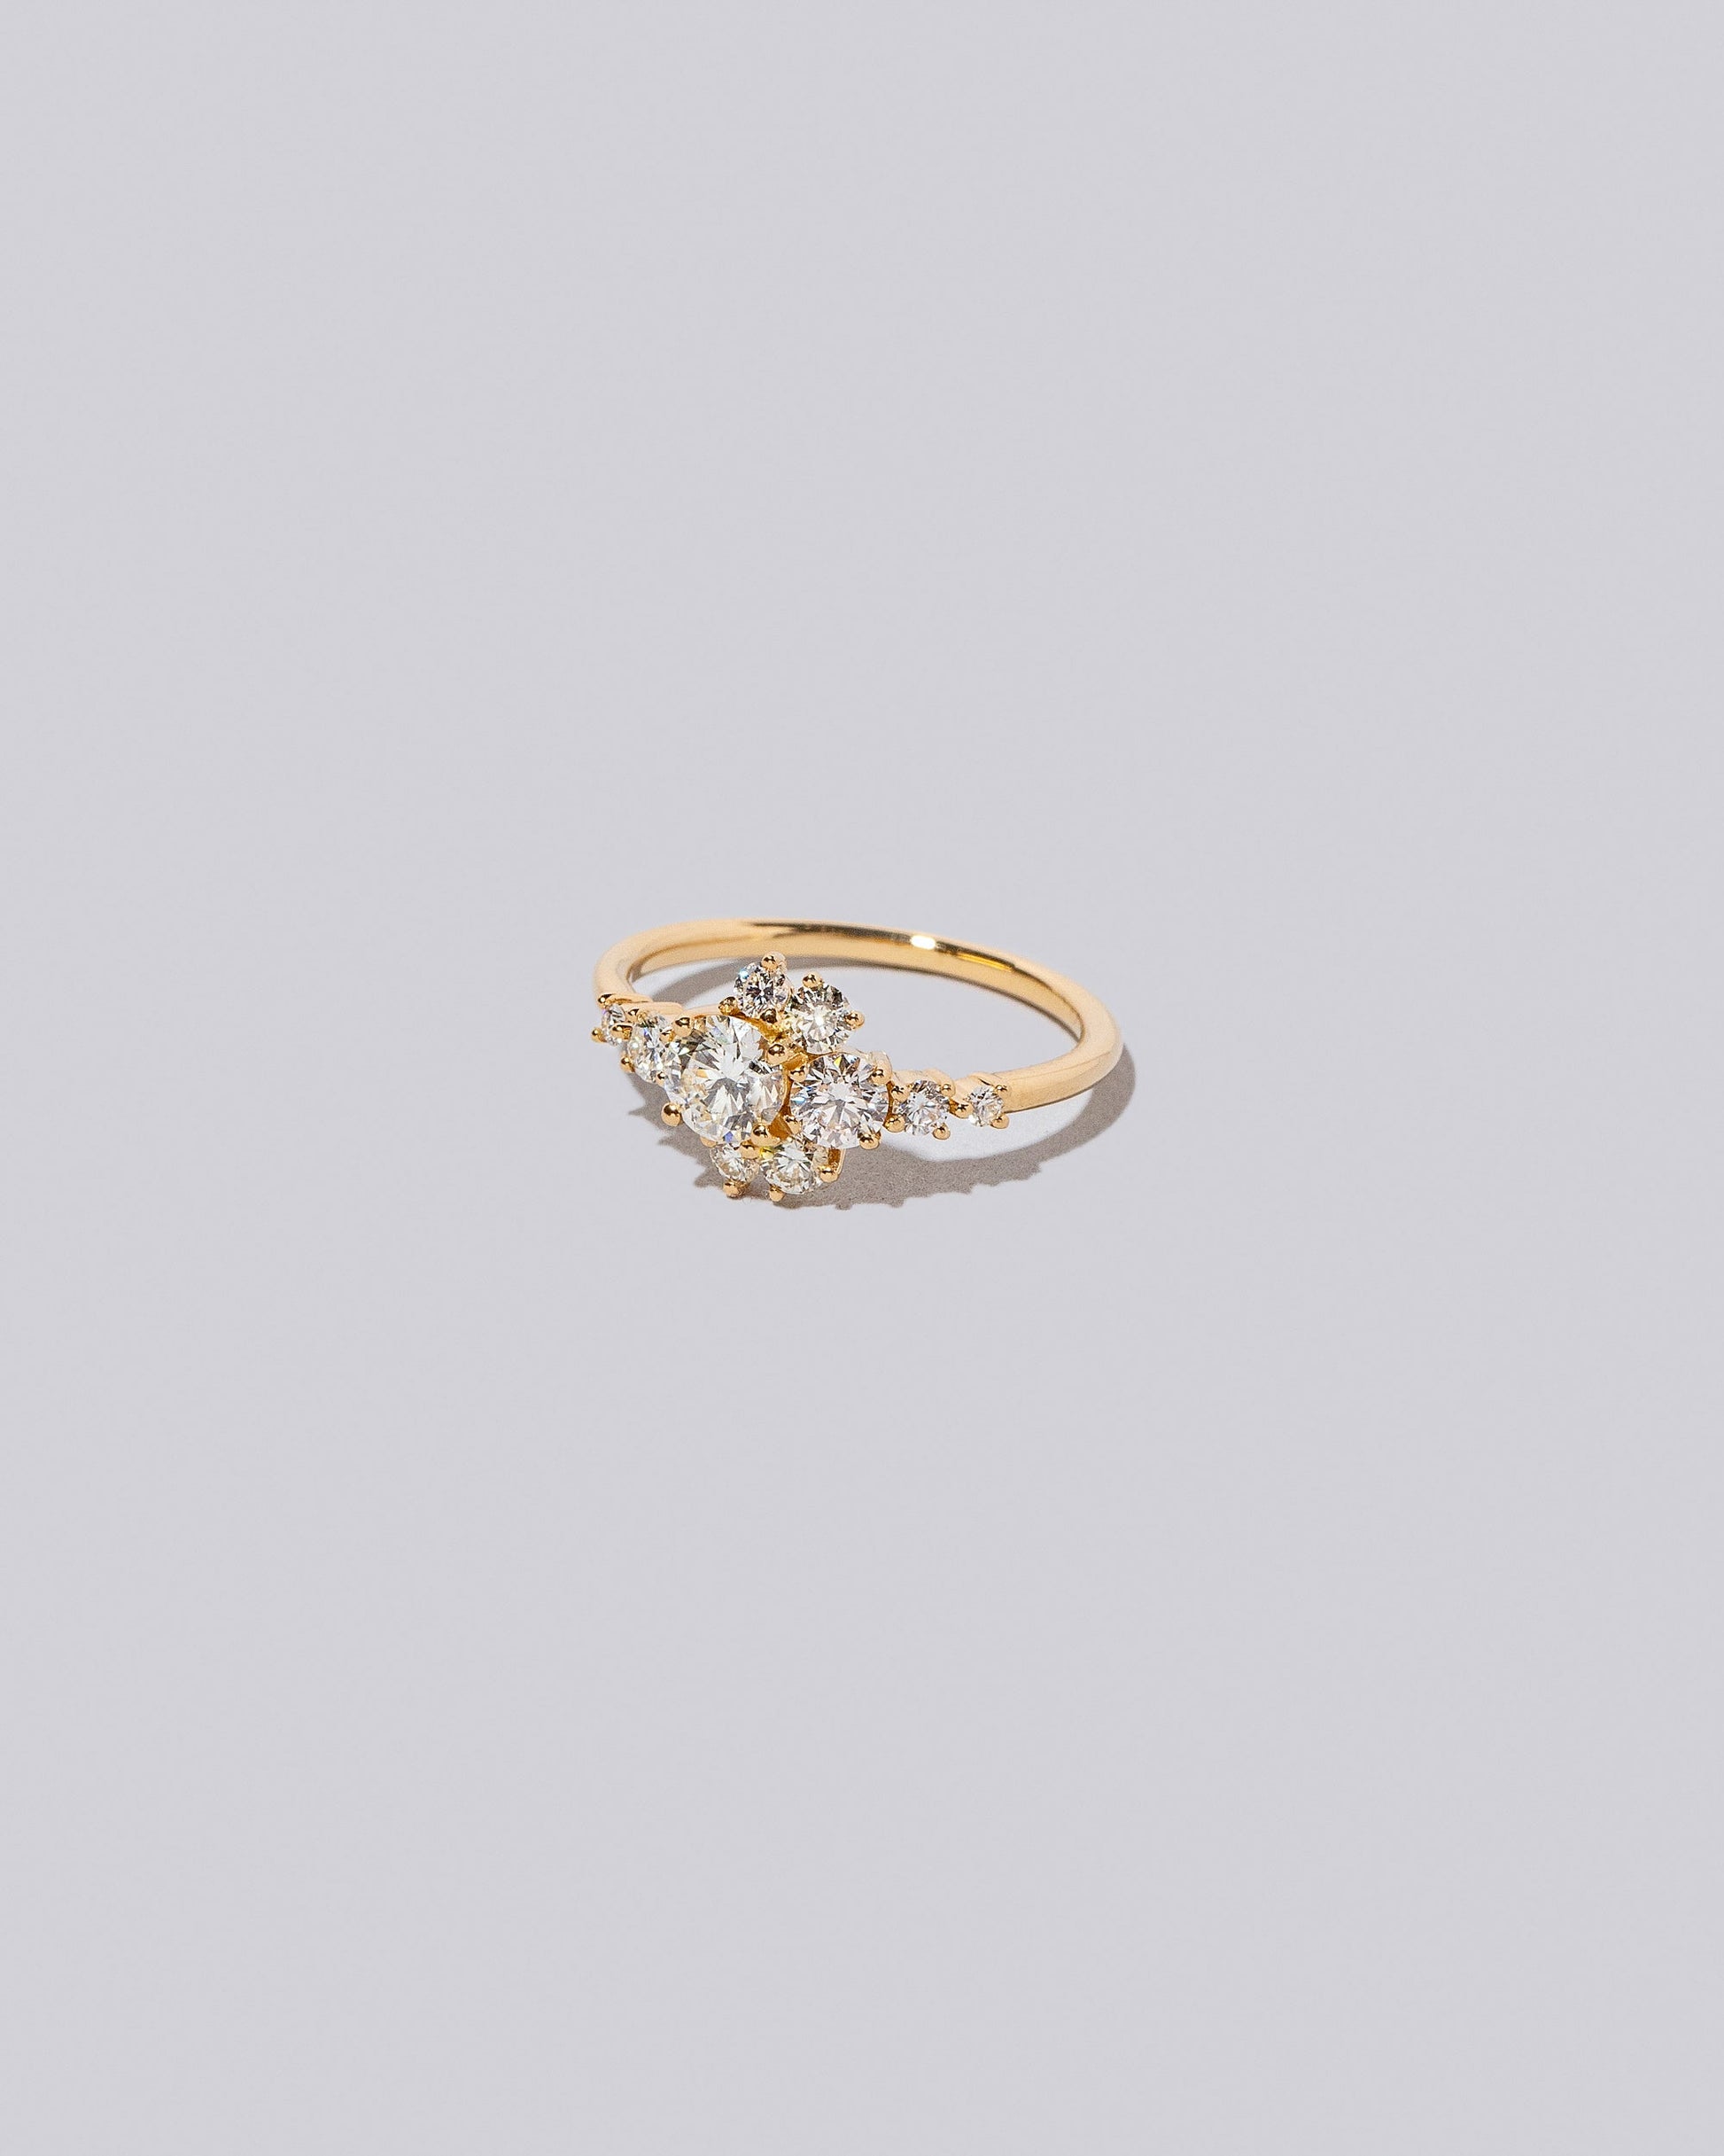  Anthea Ring - White Diamonds on light color background.